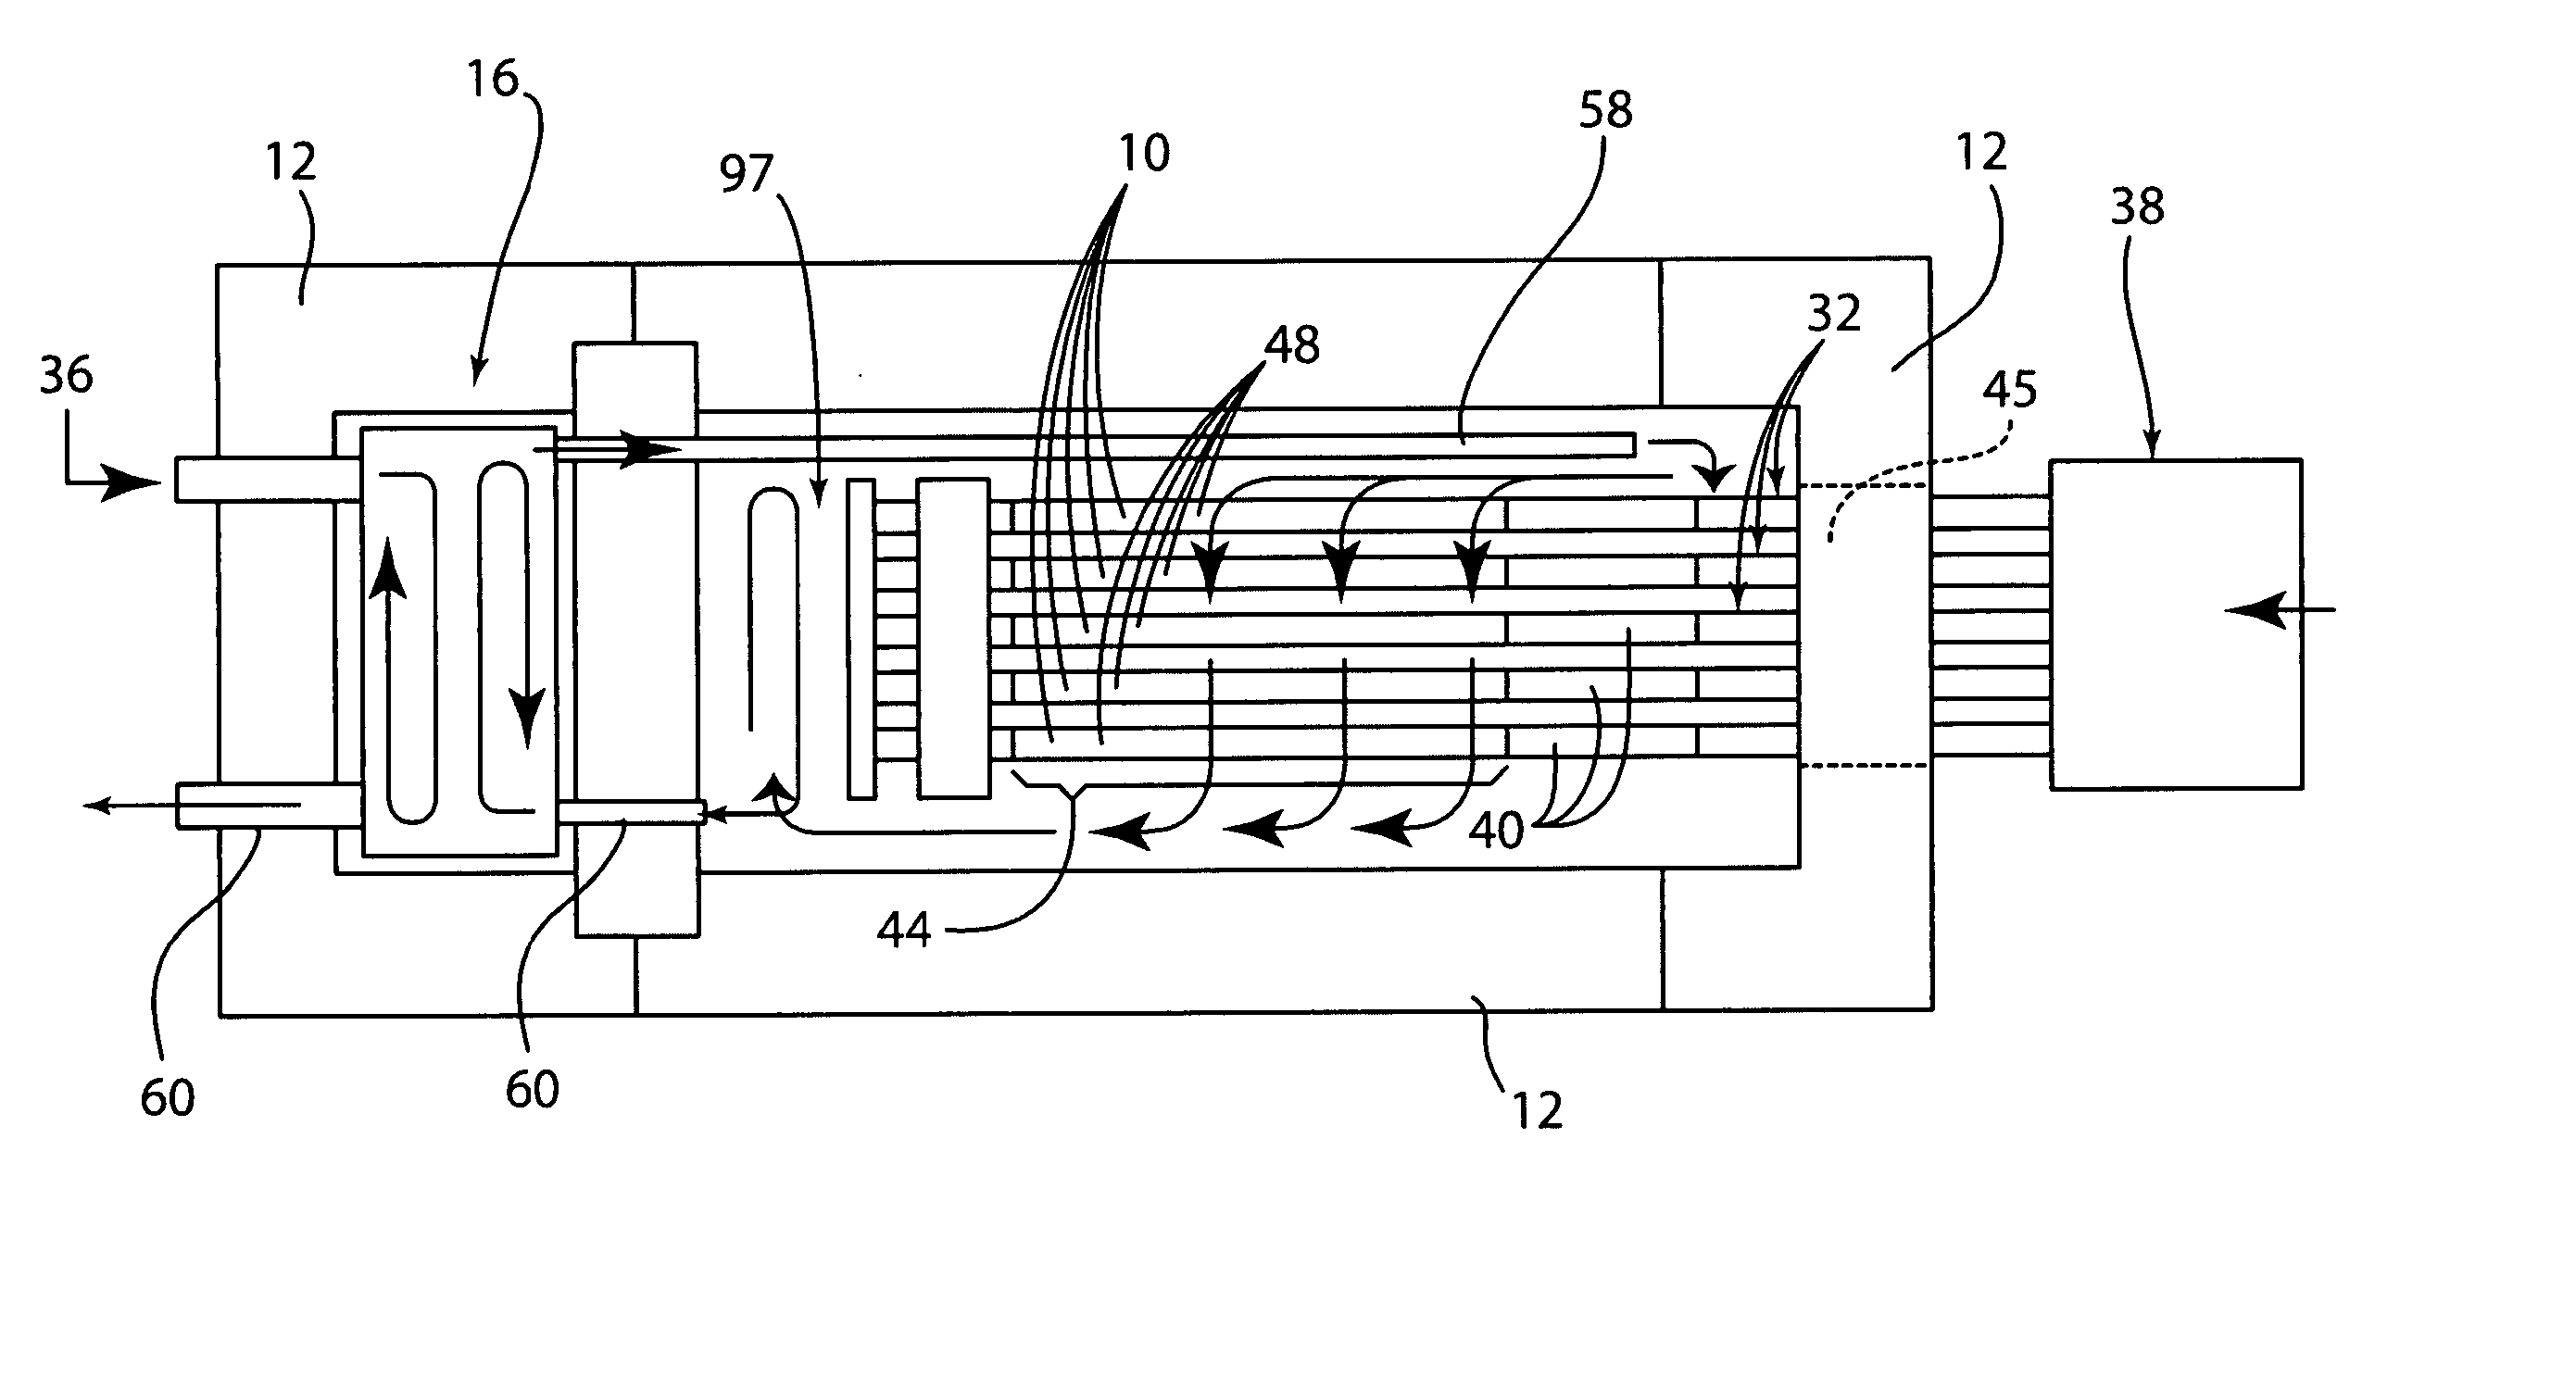 Solid oxide fuel cell tube with internal fuel processing